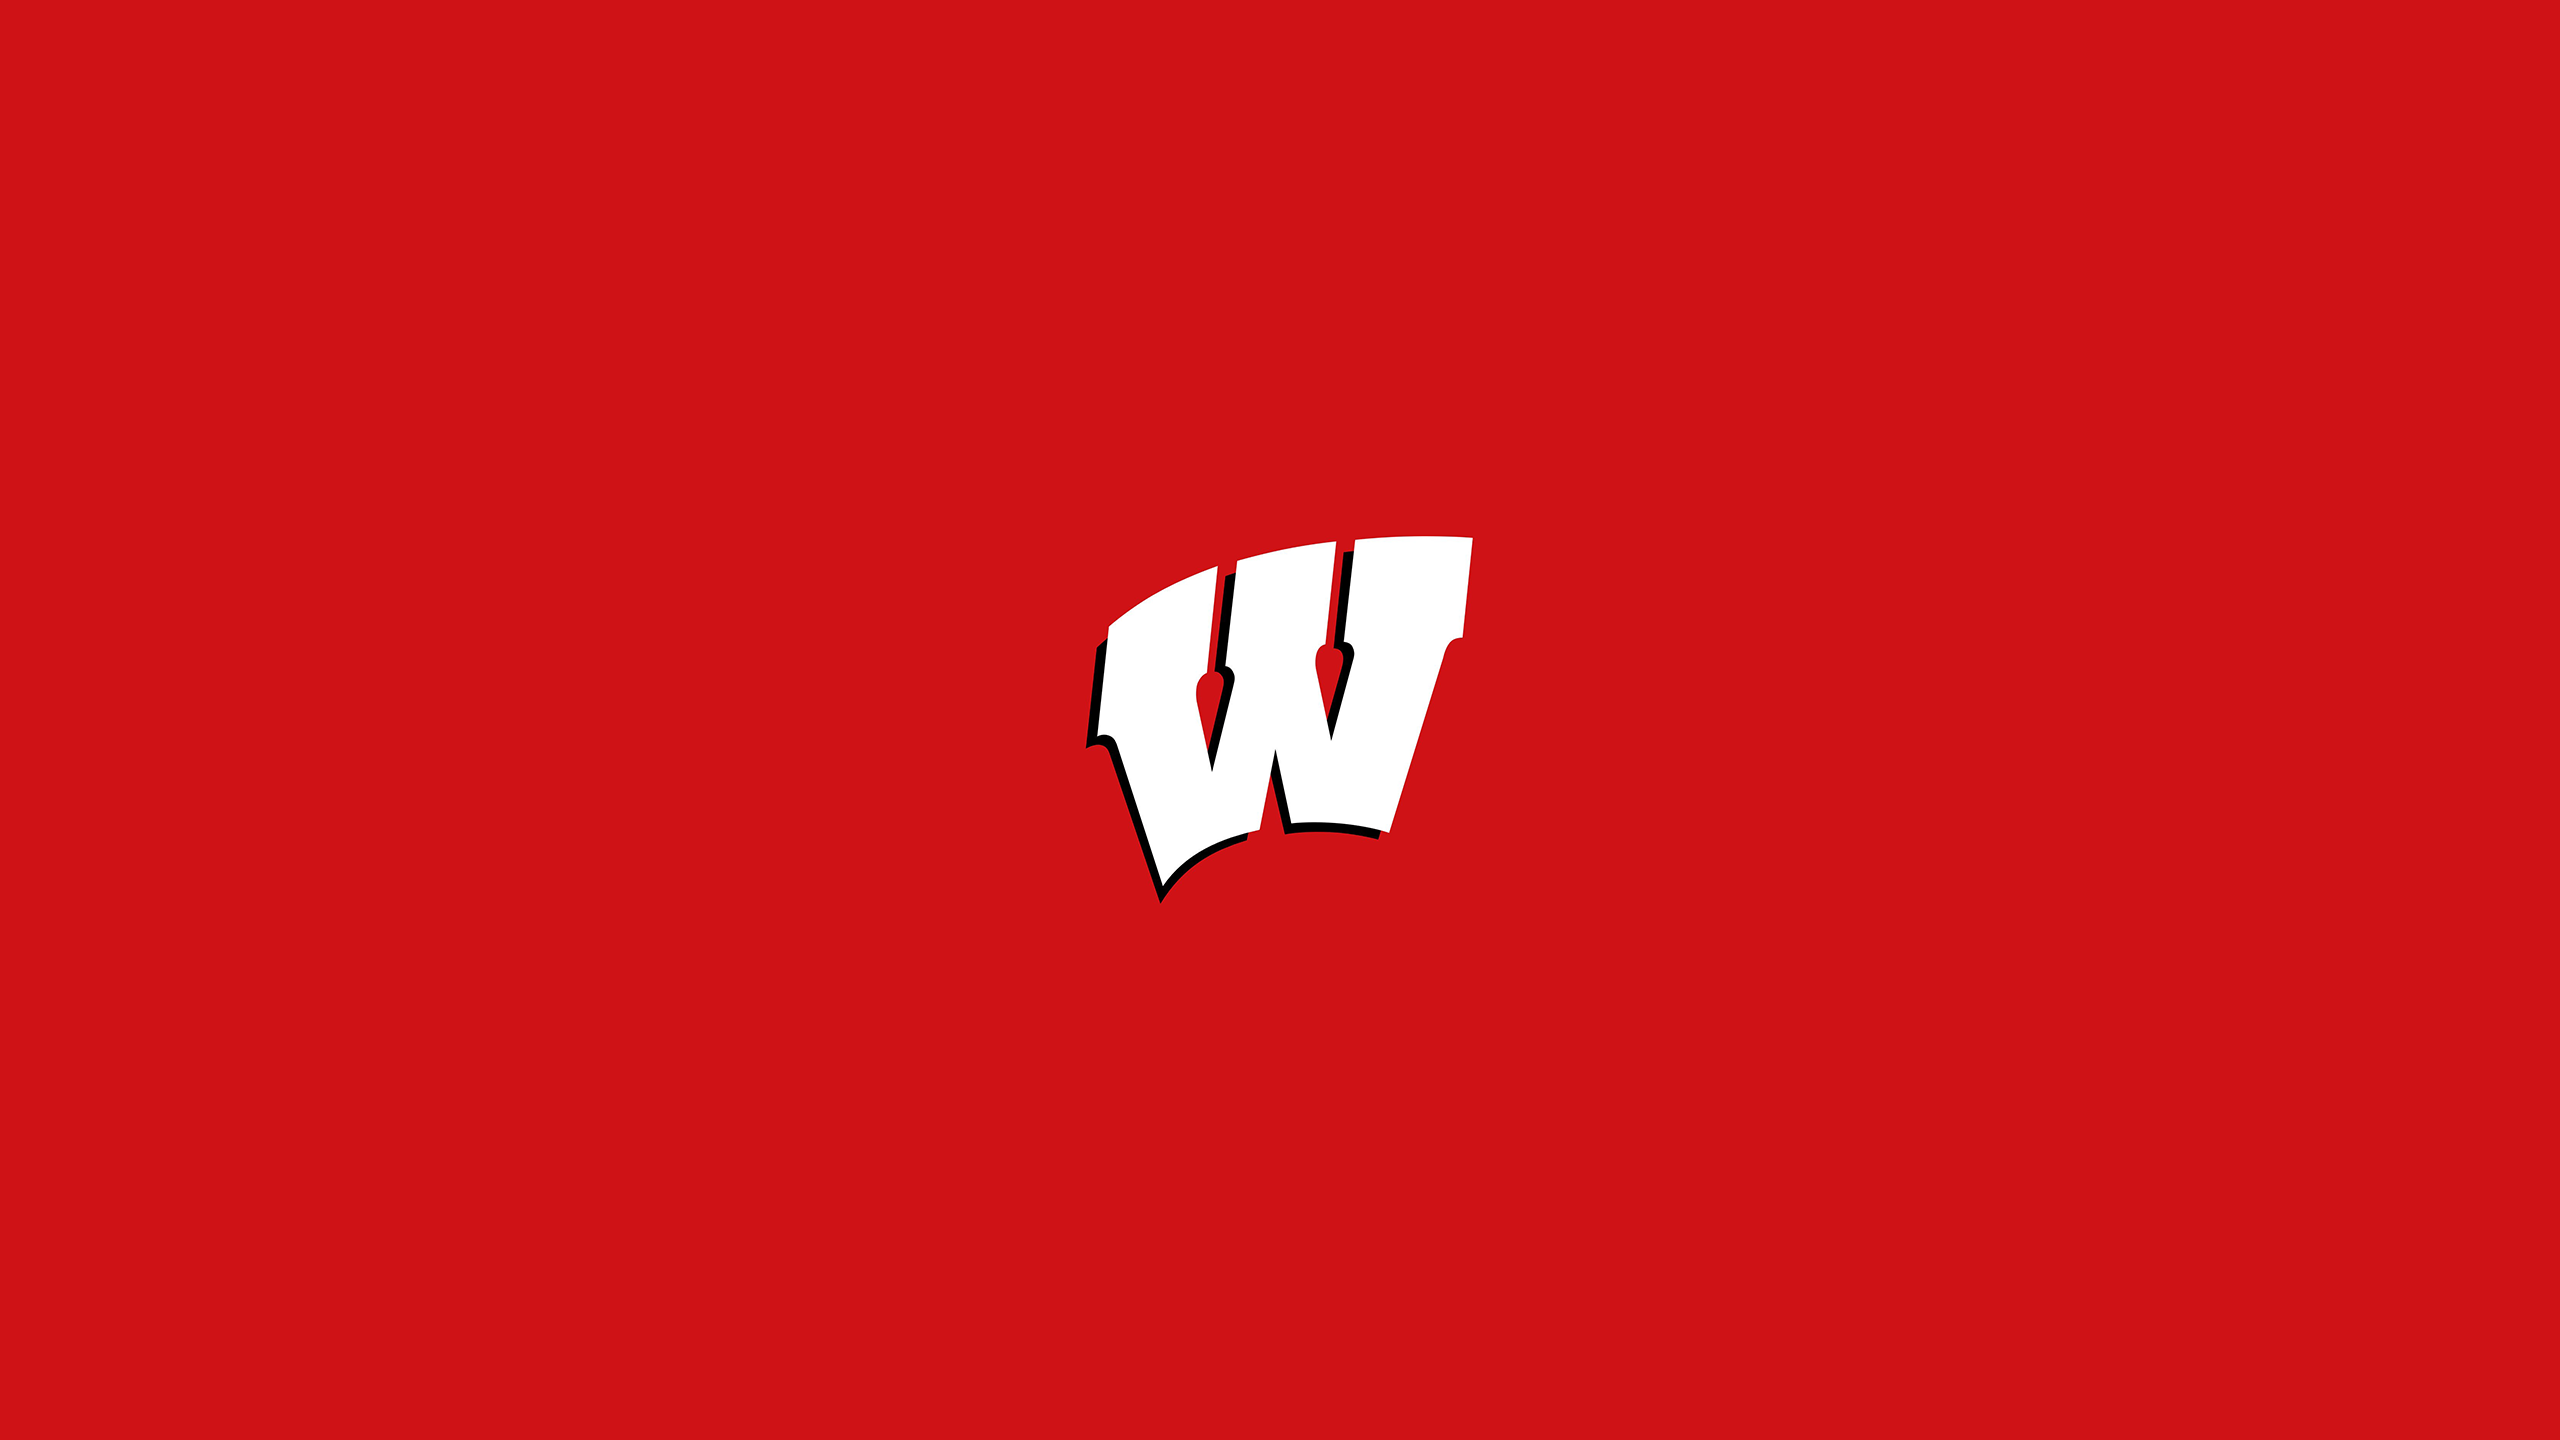 Wisconsin Badgers Football - NCAAF - Square Bettor